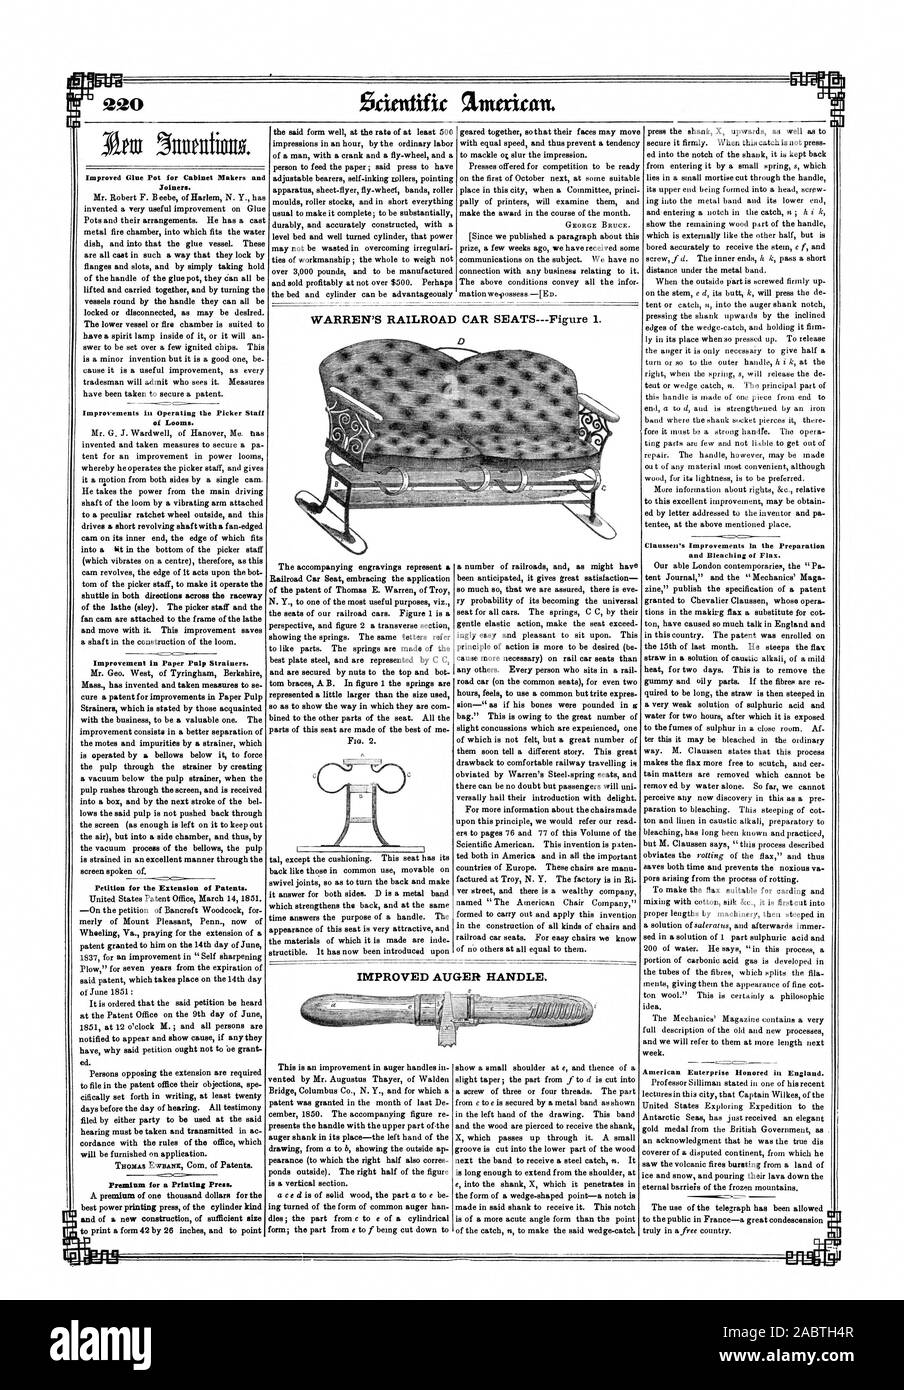 Improved Glue Pot for Cabinet Makers and Joiners. of Looms. Petition for the Extension of Patents. Premium for a Printing Press. and Bleaching of Flax. WARREN'S RAILROAD CAR SEATS—Figure 1. IMPROVED AUGER HANDLE. I. .21 eeo, scientific american, 1851-03-29 Stock Photo